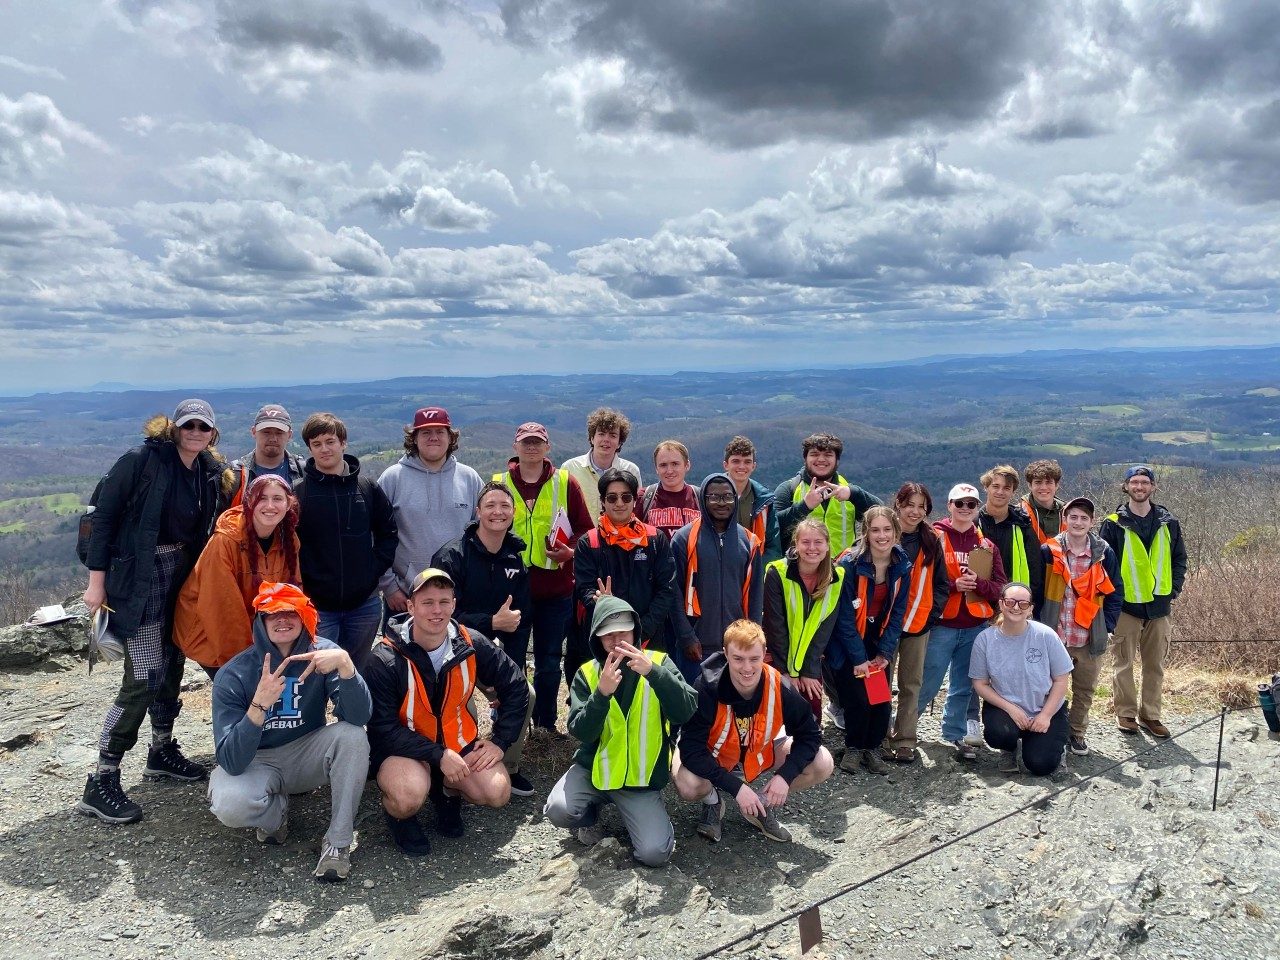 A group photo of 26 people outdoors standing in front of a landscape outlook